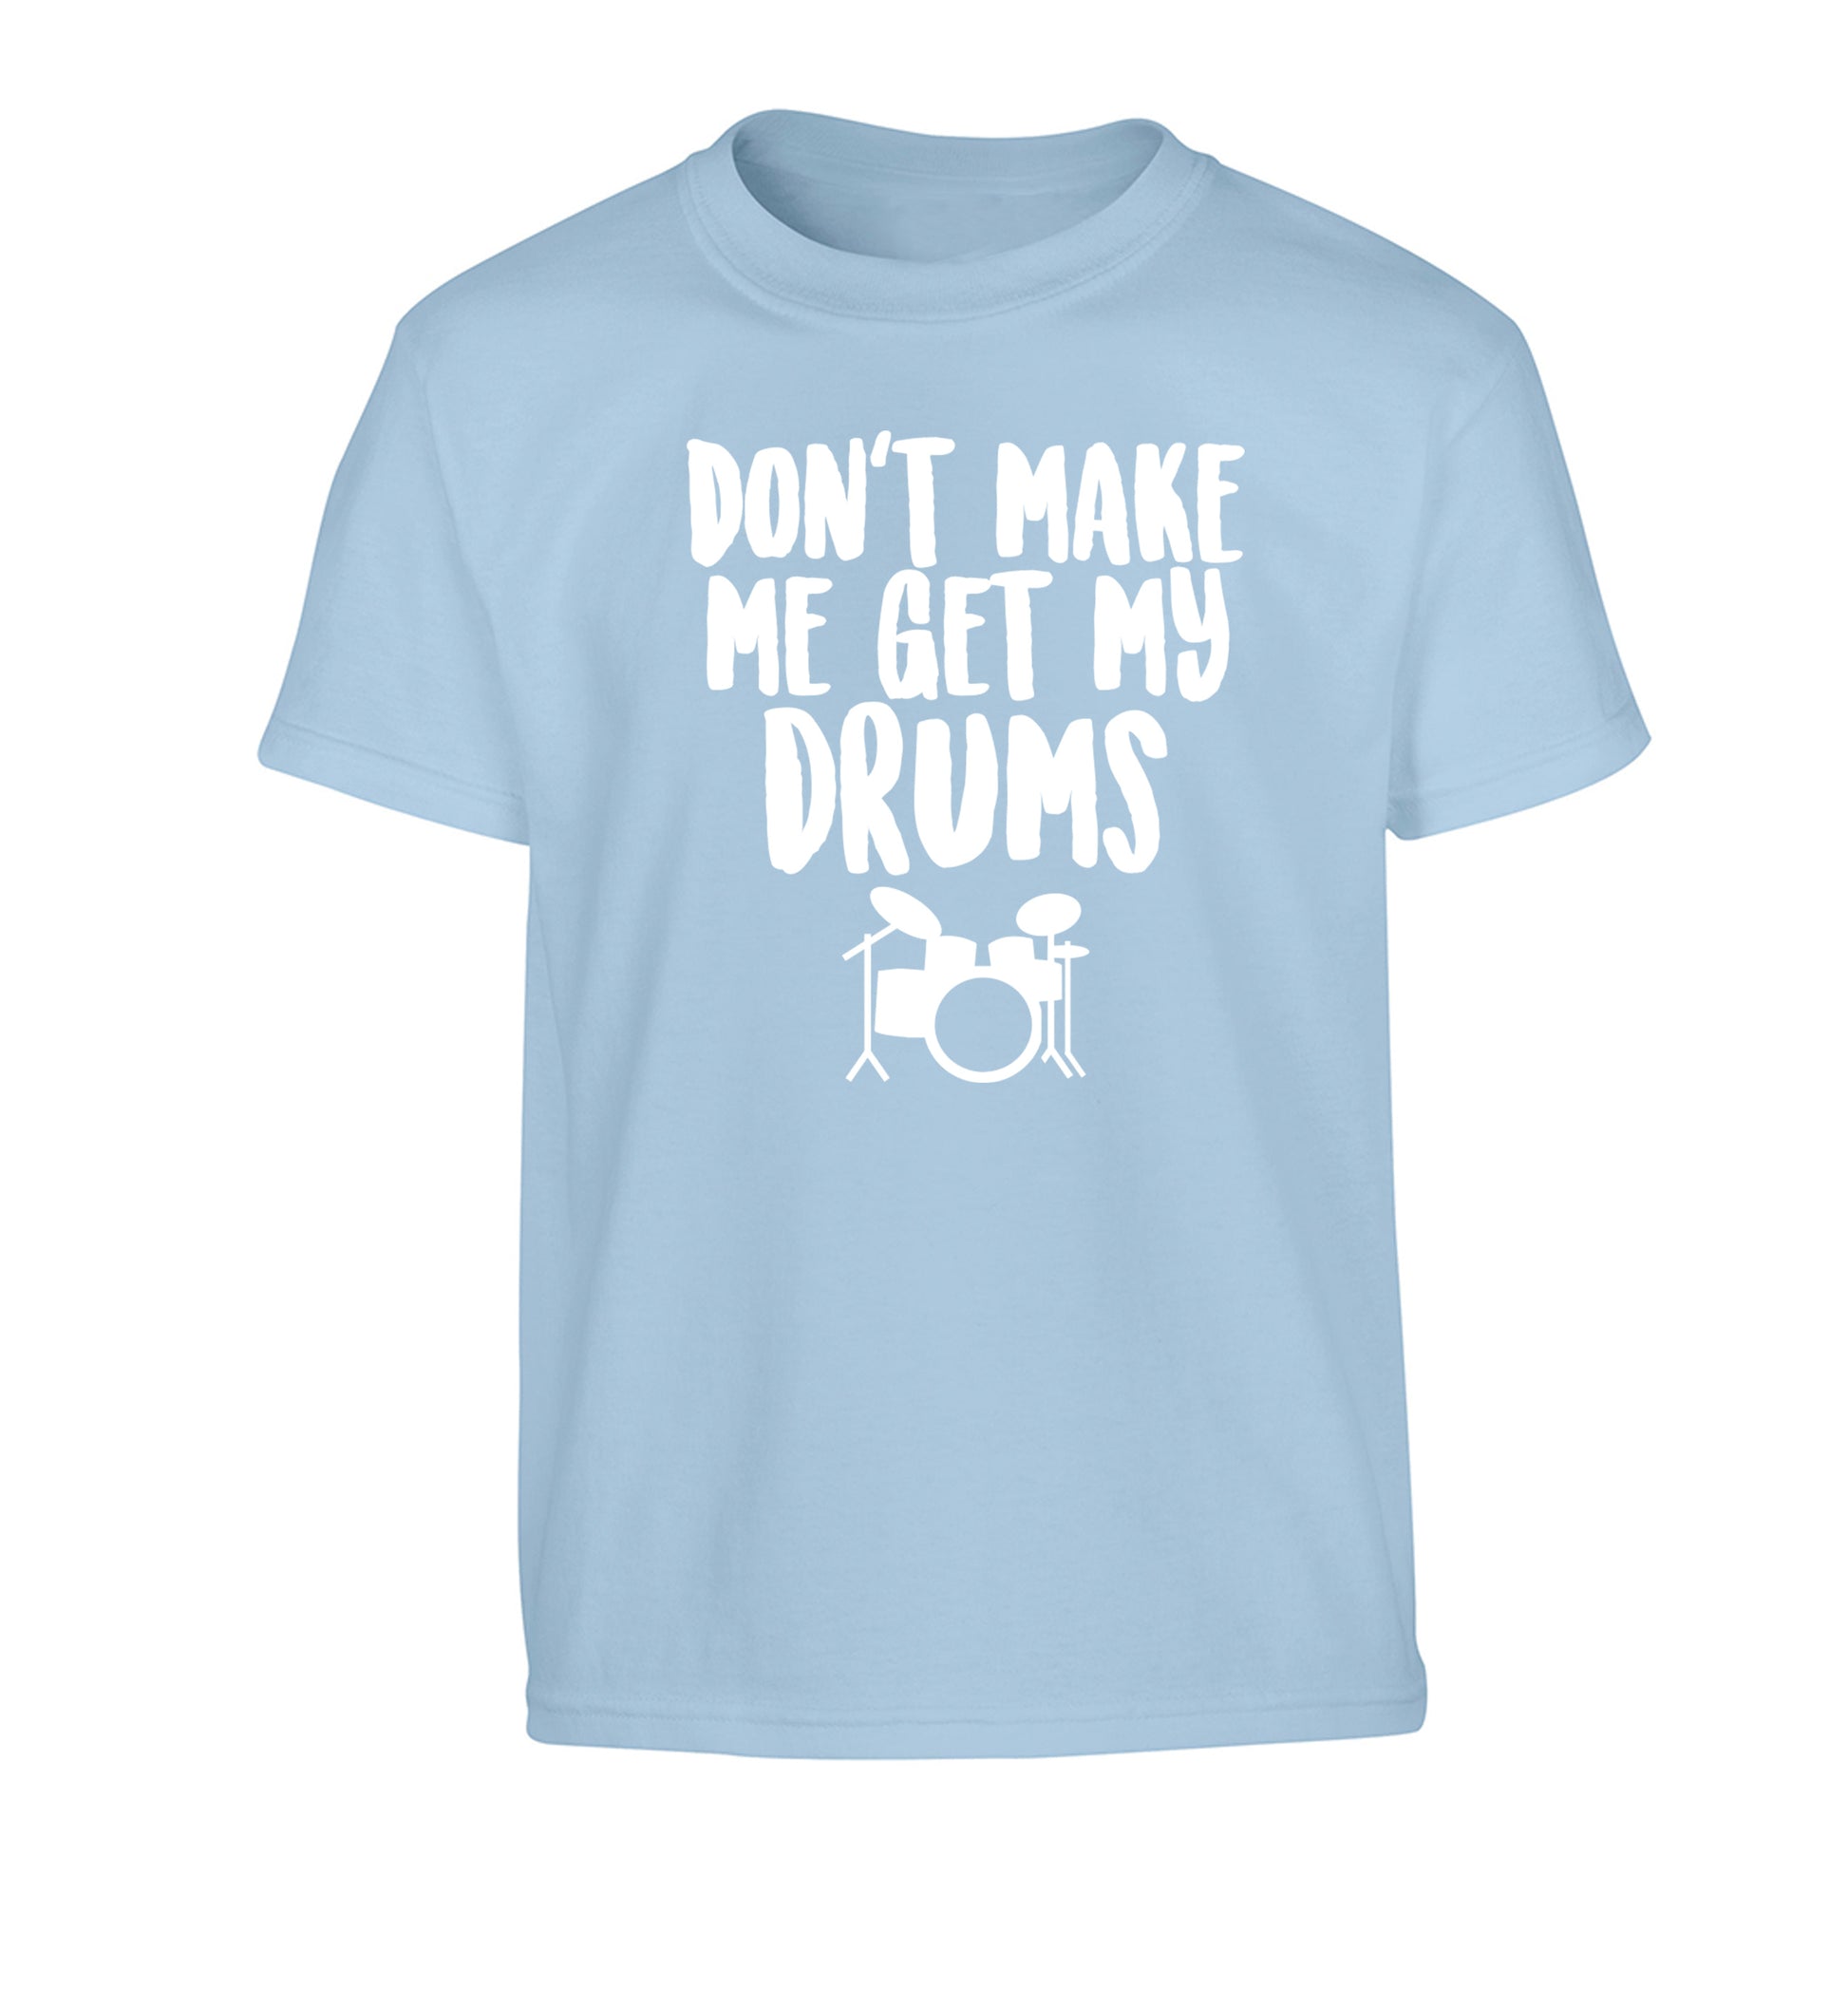 Don't make me get my drums Children's light blue Tshirt 12-14 Years